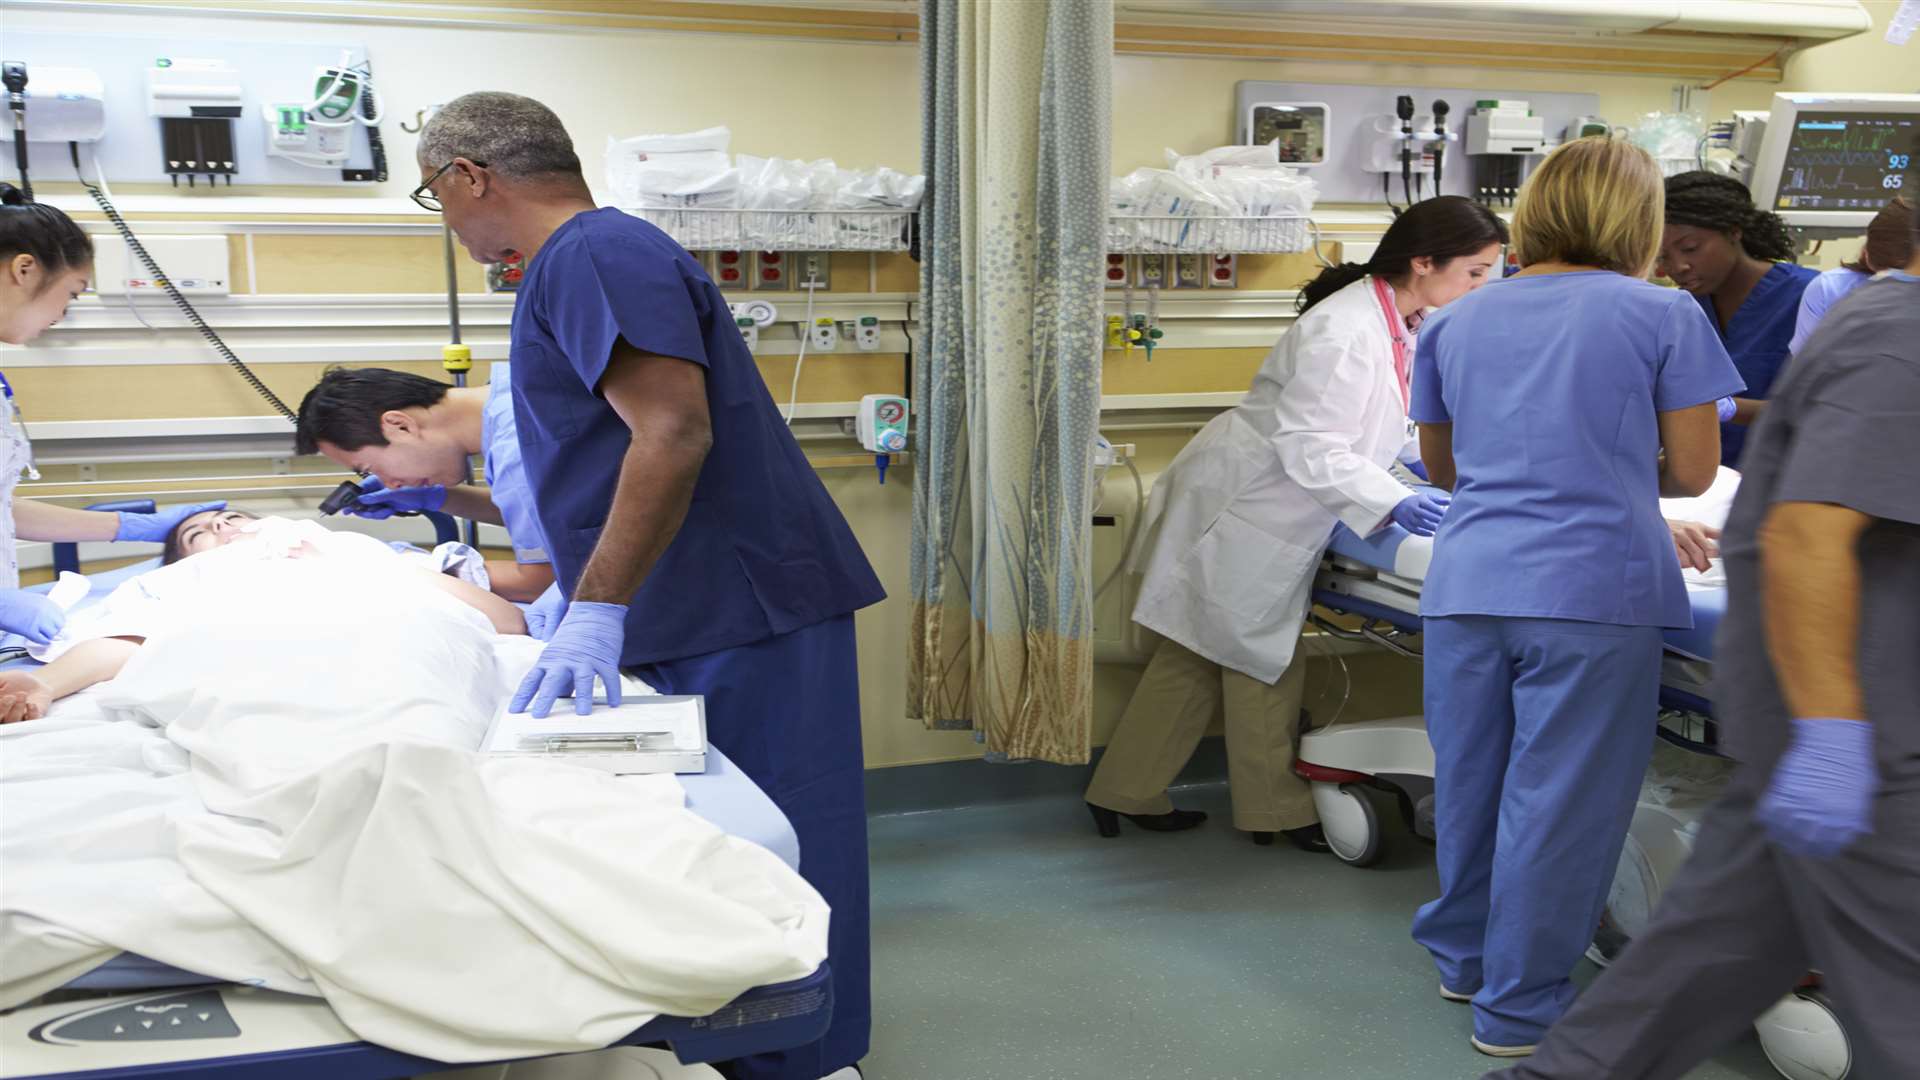 East Kent has the worst record in England for waiting times in A&E. Image: Thinkstock